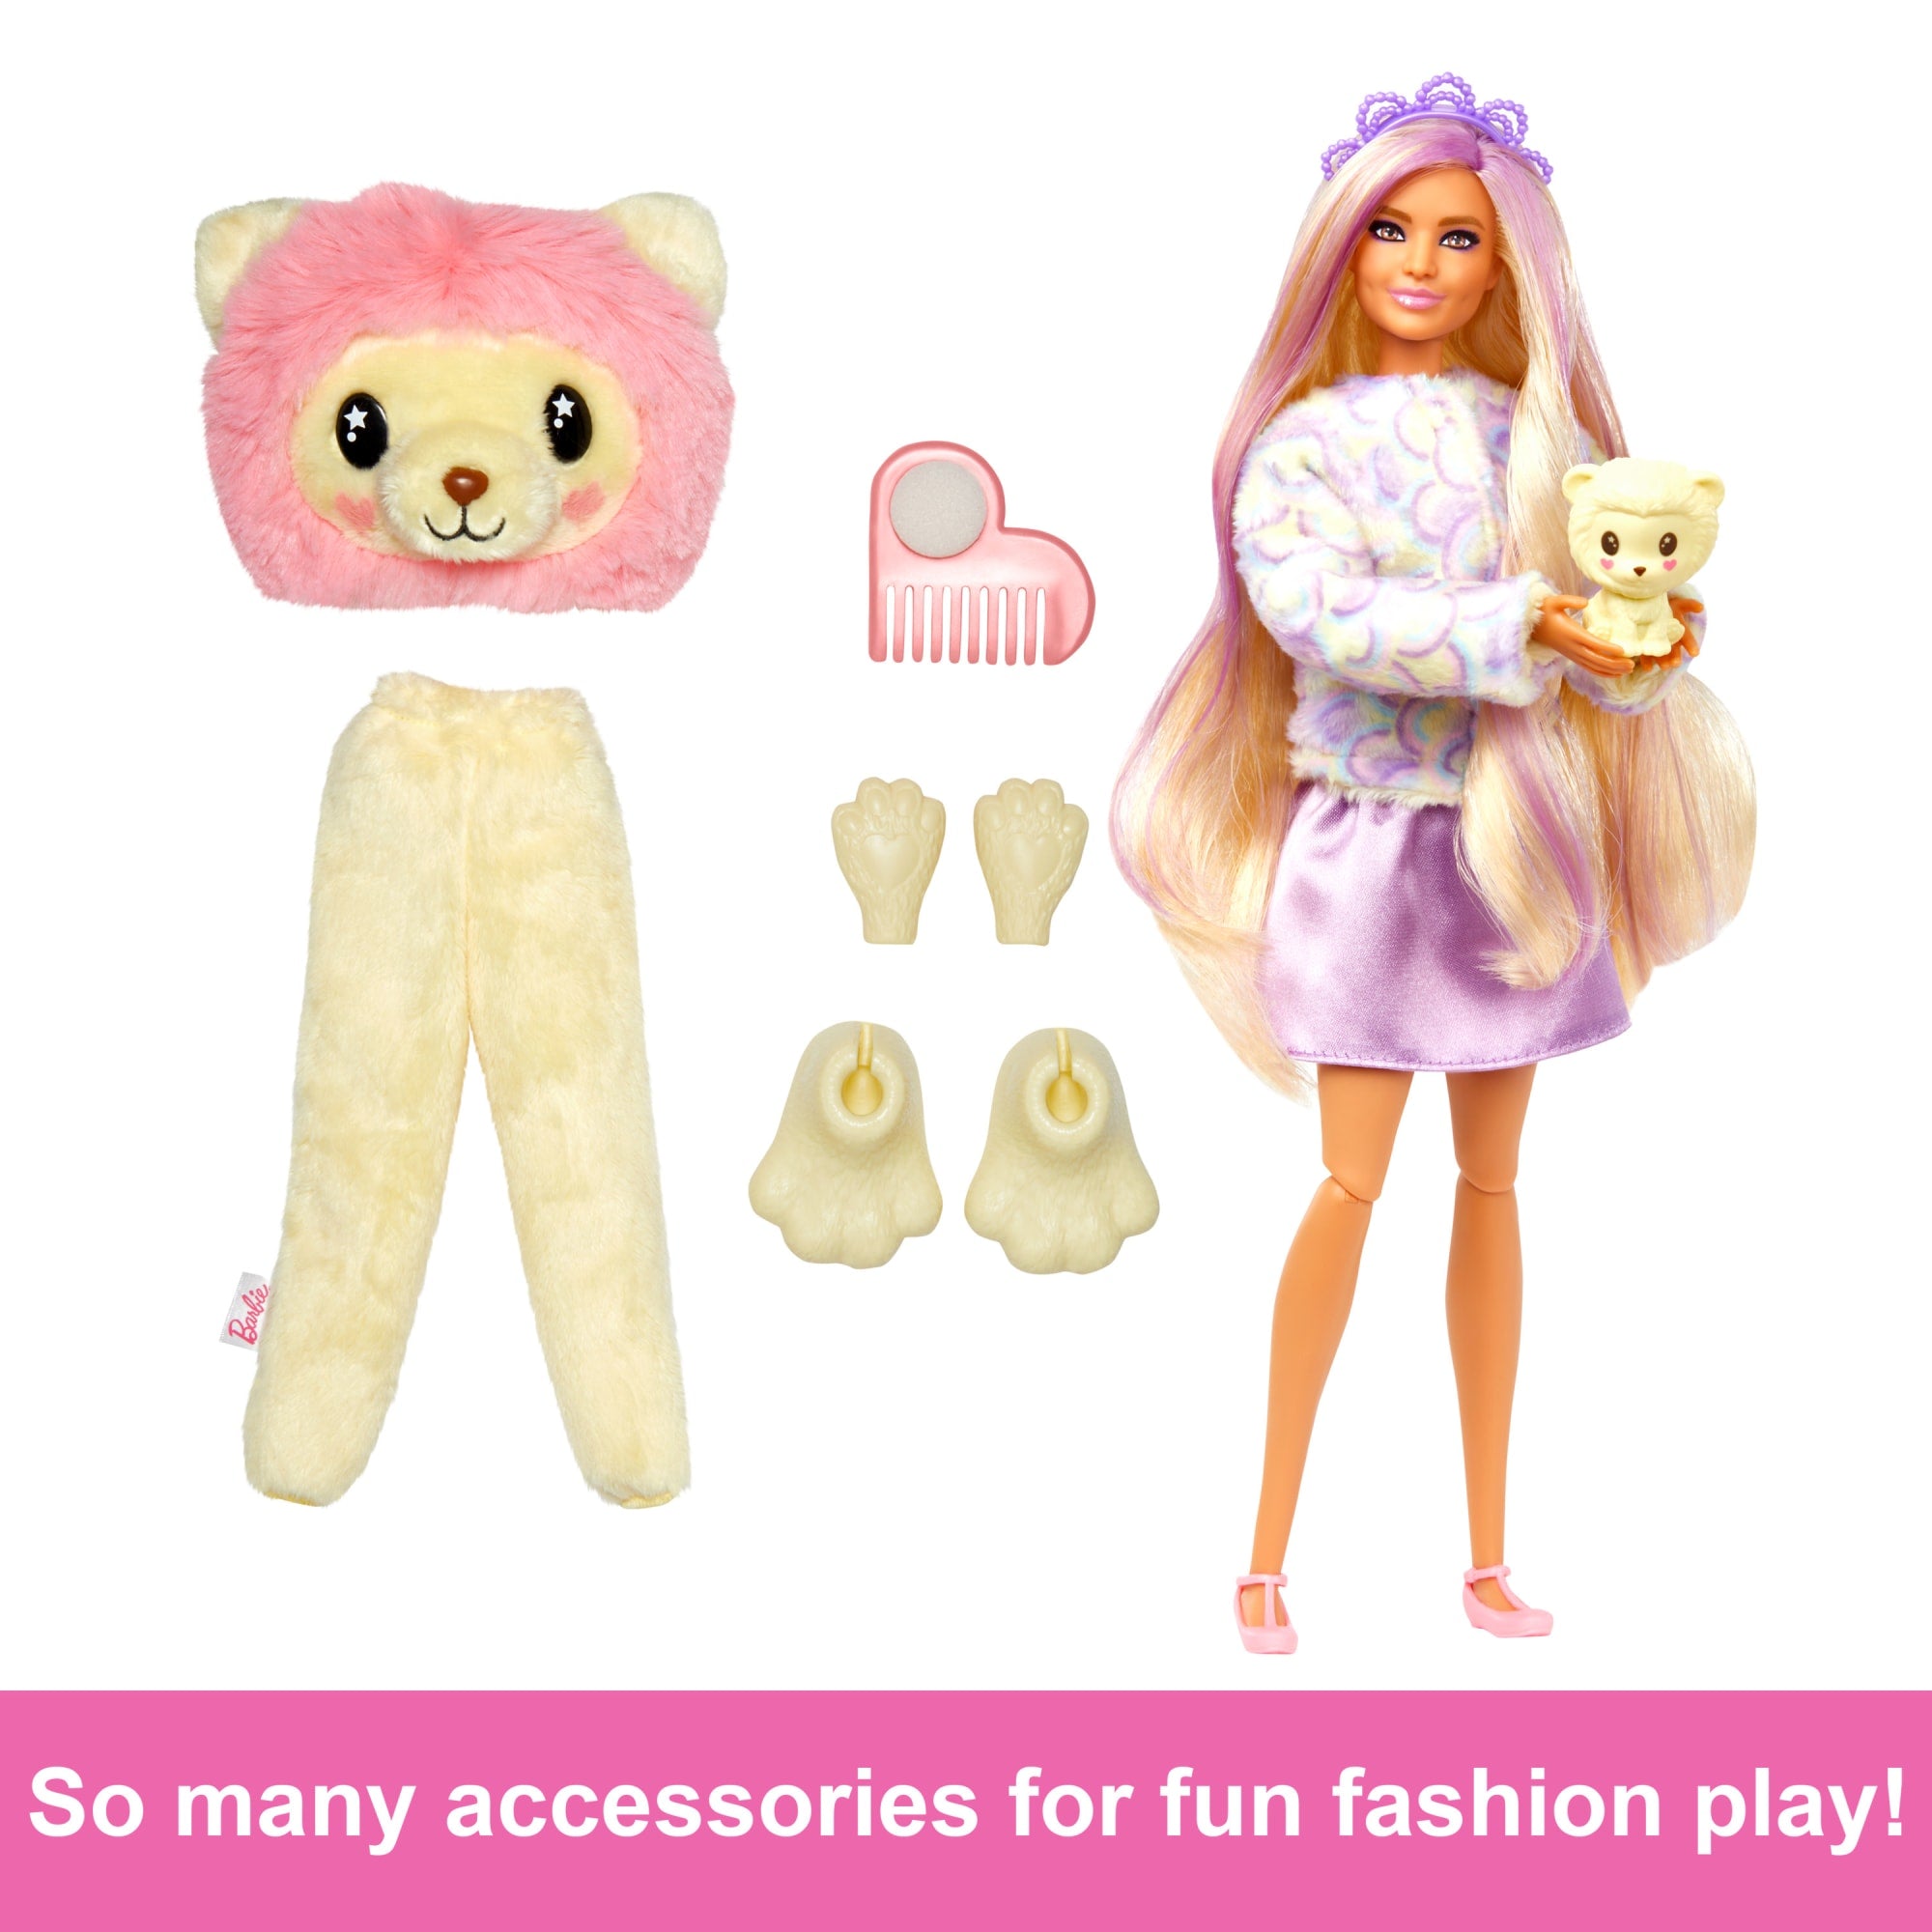 Barbie Cutie Reveal Doll - The Toy Box Hanover